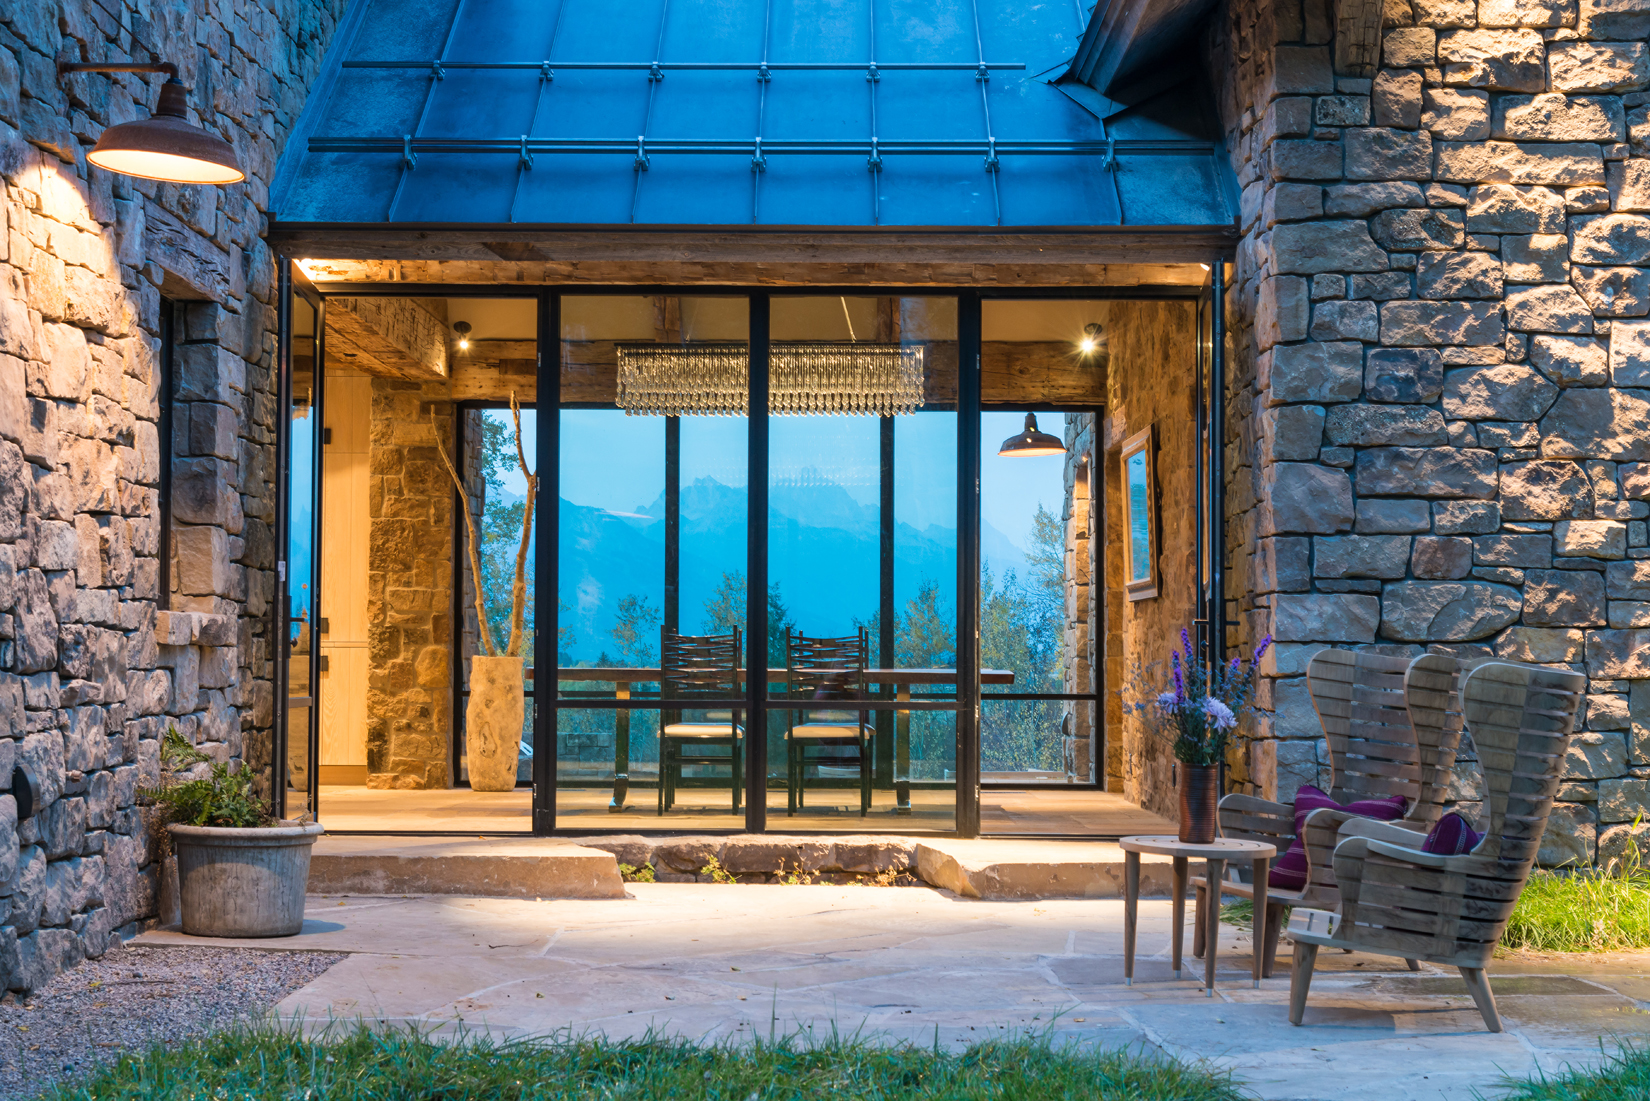 Floor-to-ceiling windows build connection to stunning Teton Mountain views in this Jackson Hole house by JLF Architects with Big-D Signature builders (photo by Audrey Hall).